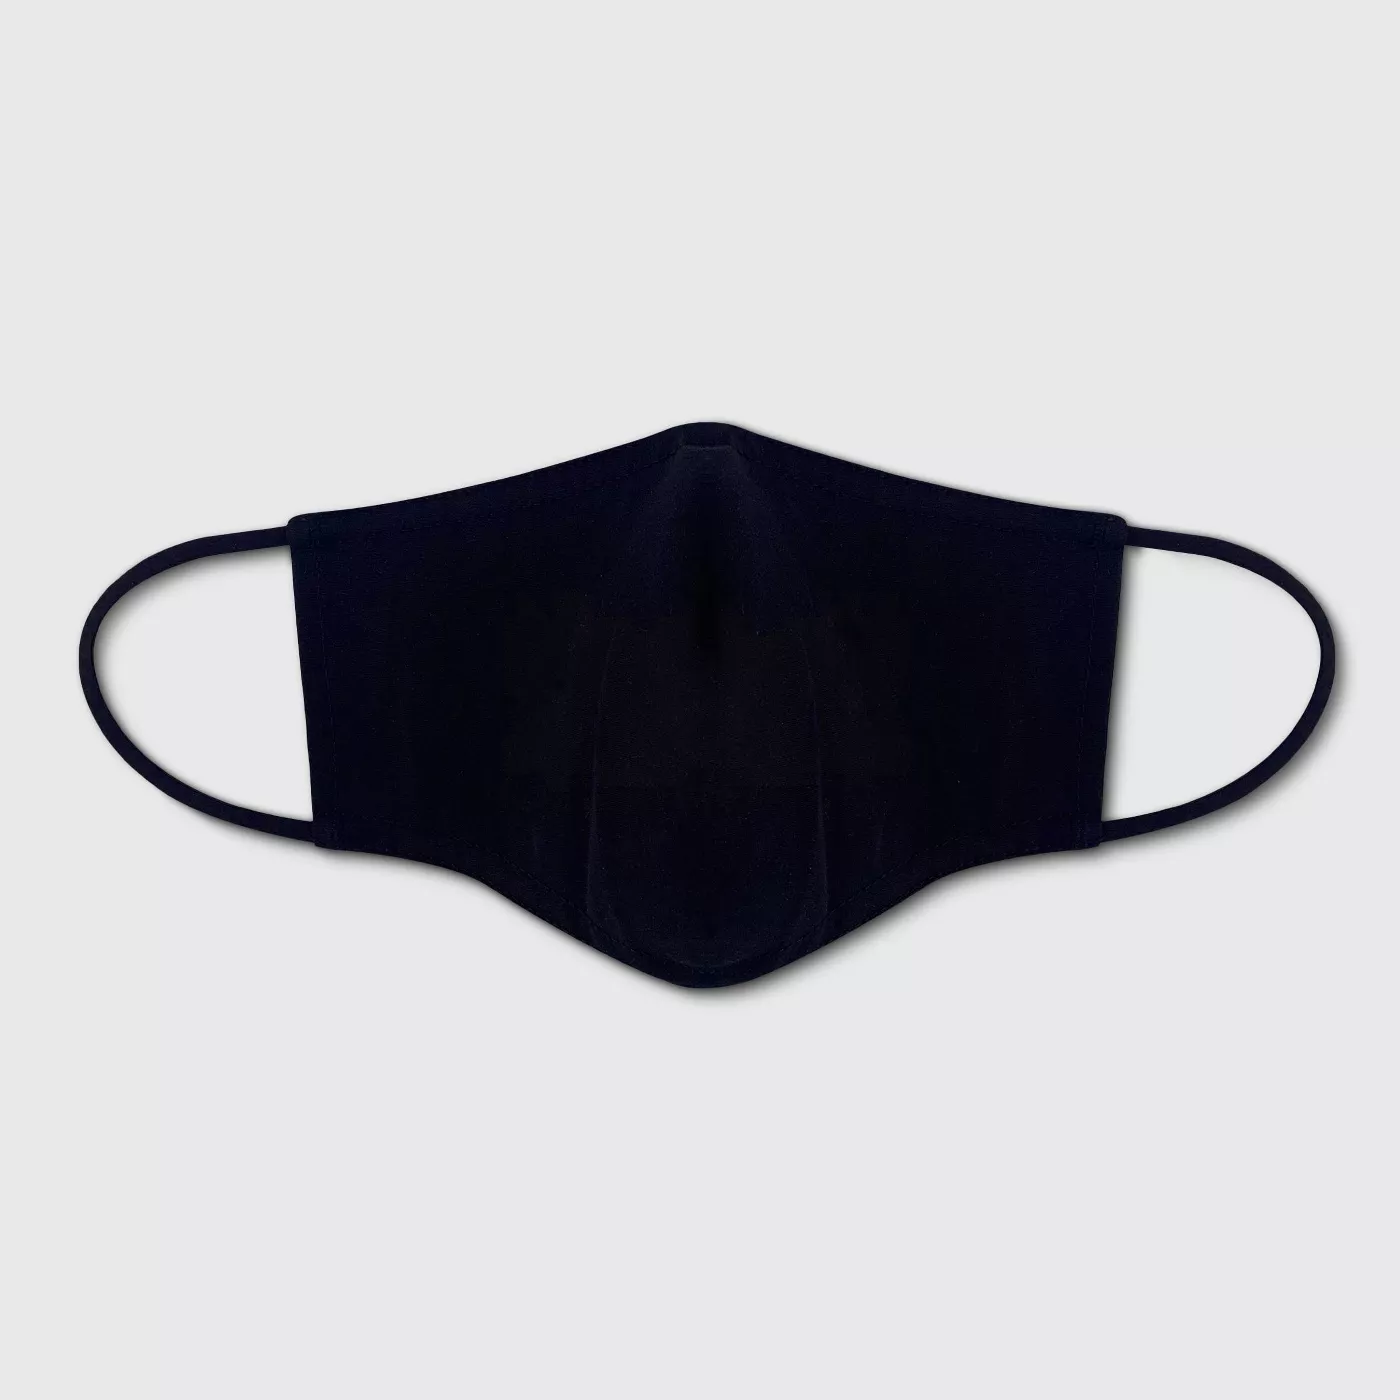 2ct Adult Fabric Face Mask - image 1 of 3